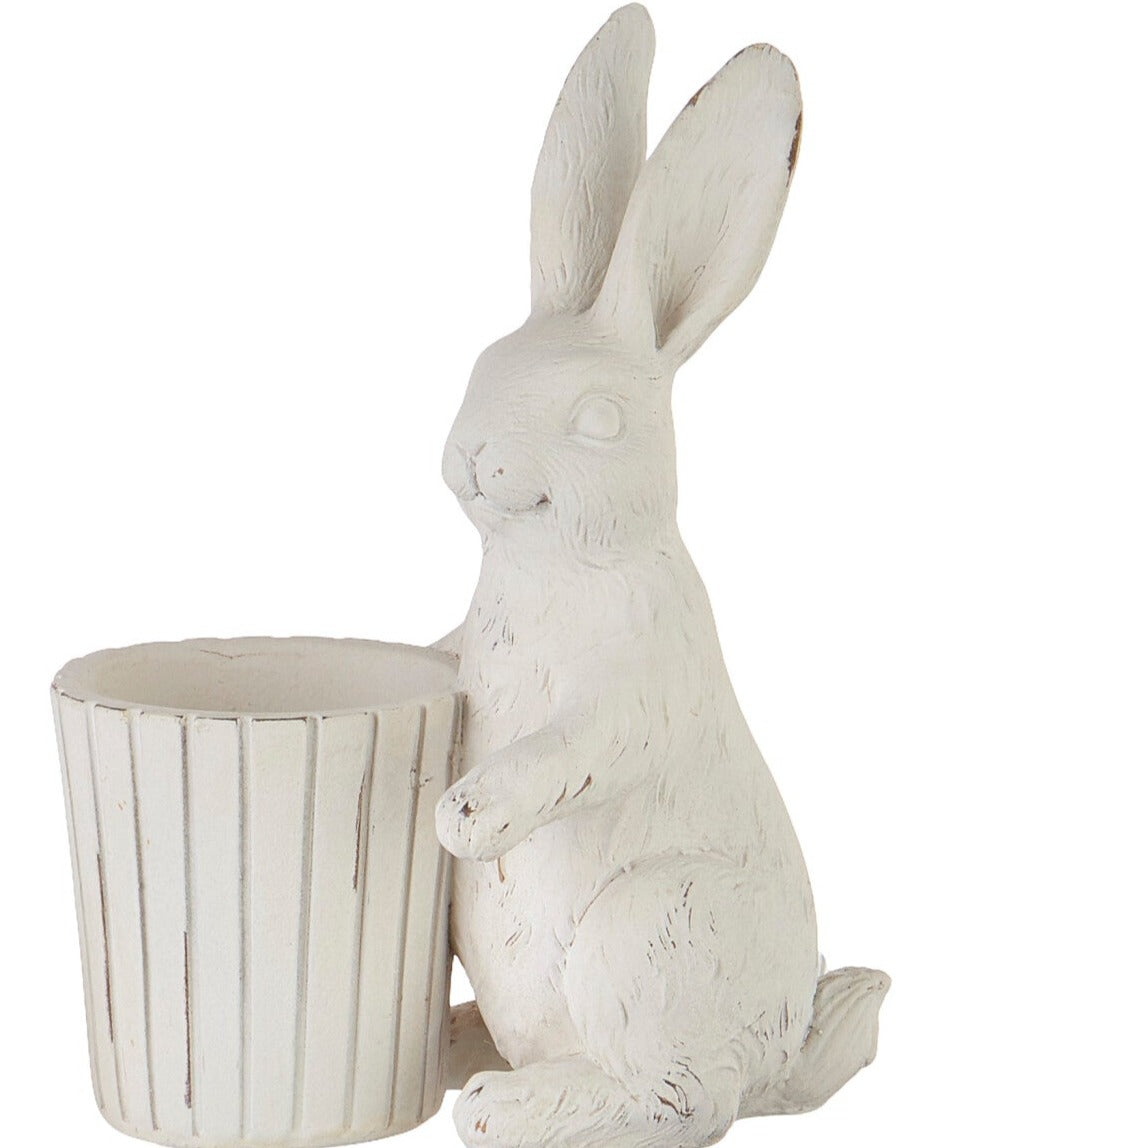 Distressed Rabbit with Basket two styles available)